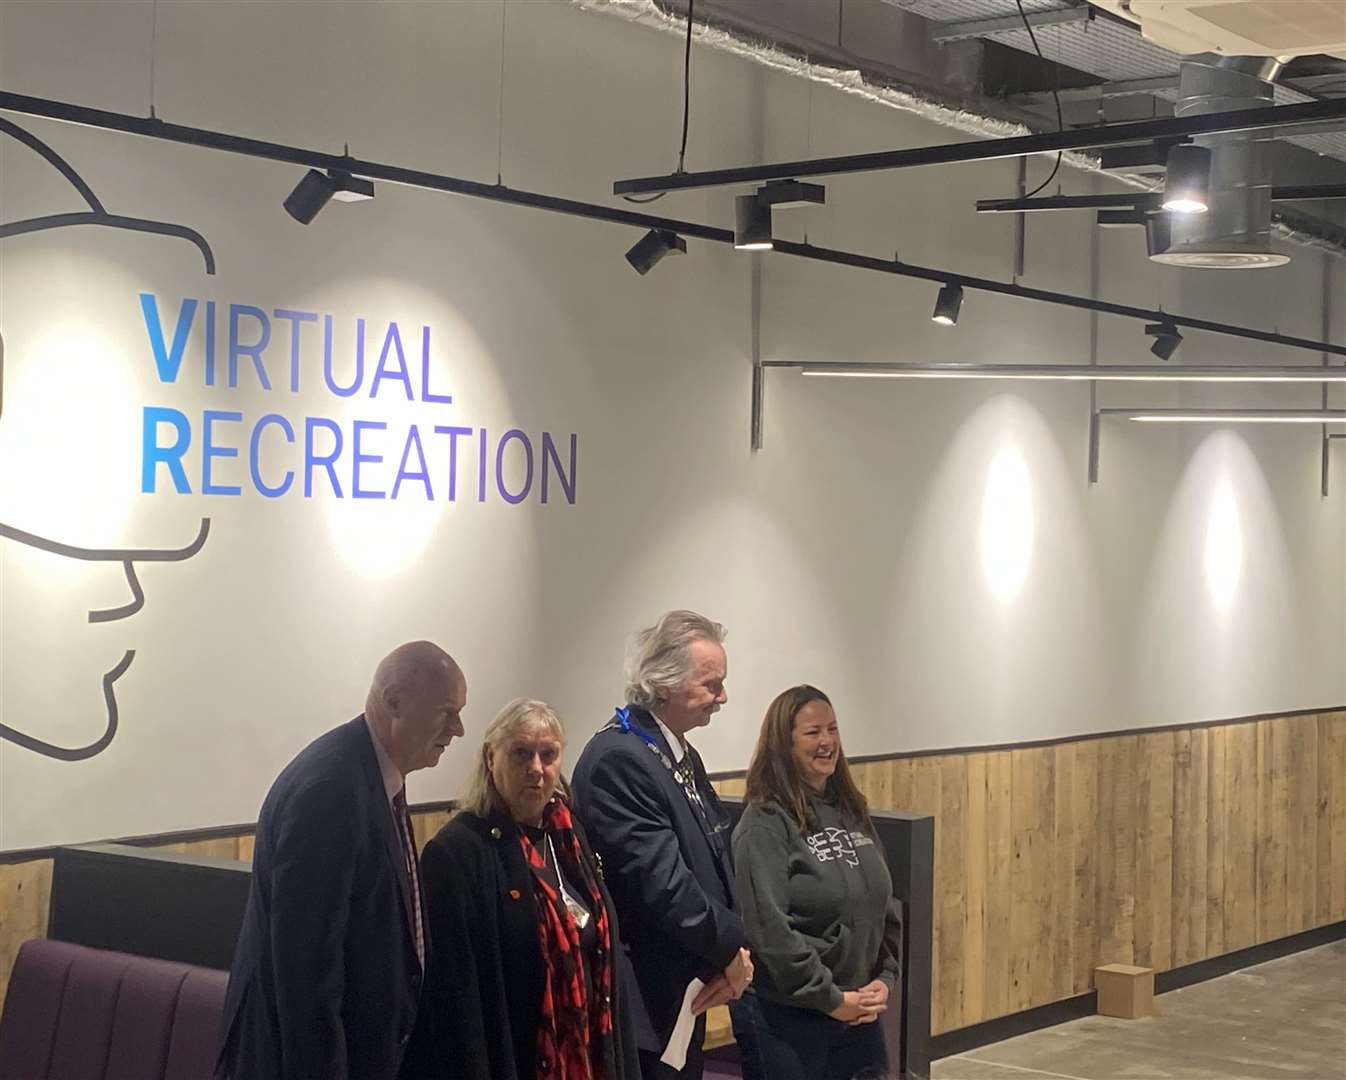 The opening of Virtual Recreation took place over the weekend